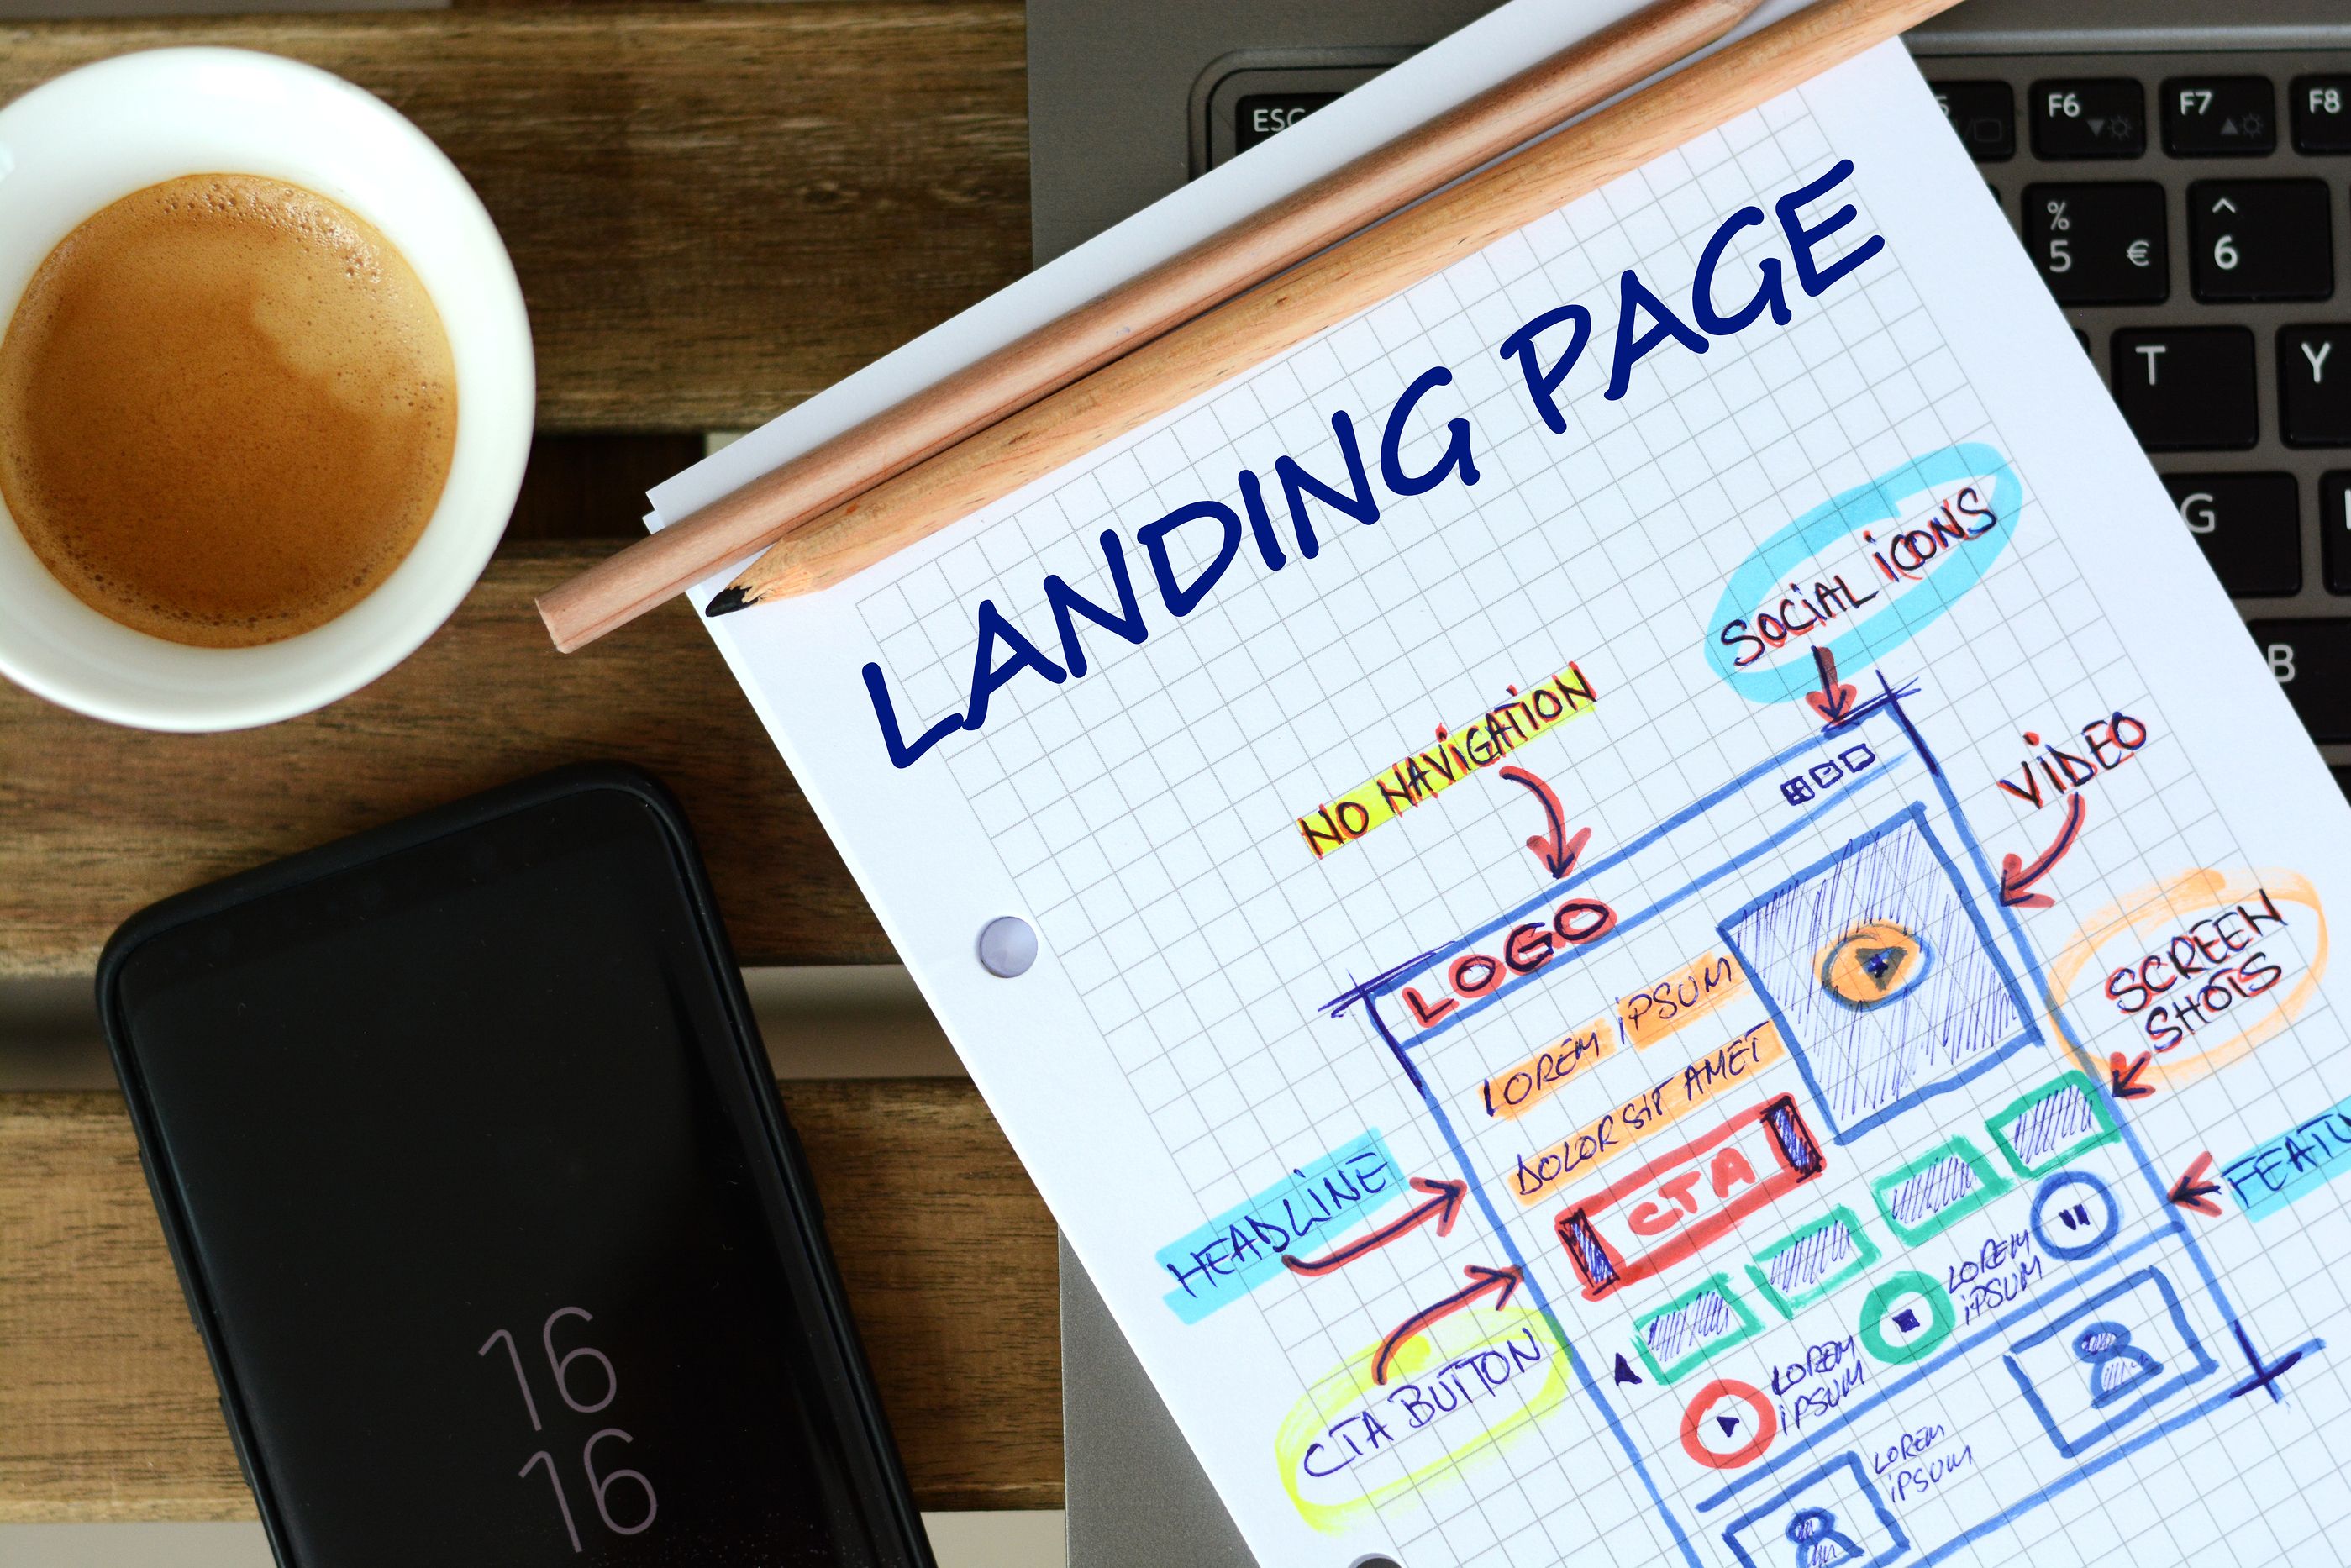 Landing Pages: What Are They and Why Are They Important?